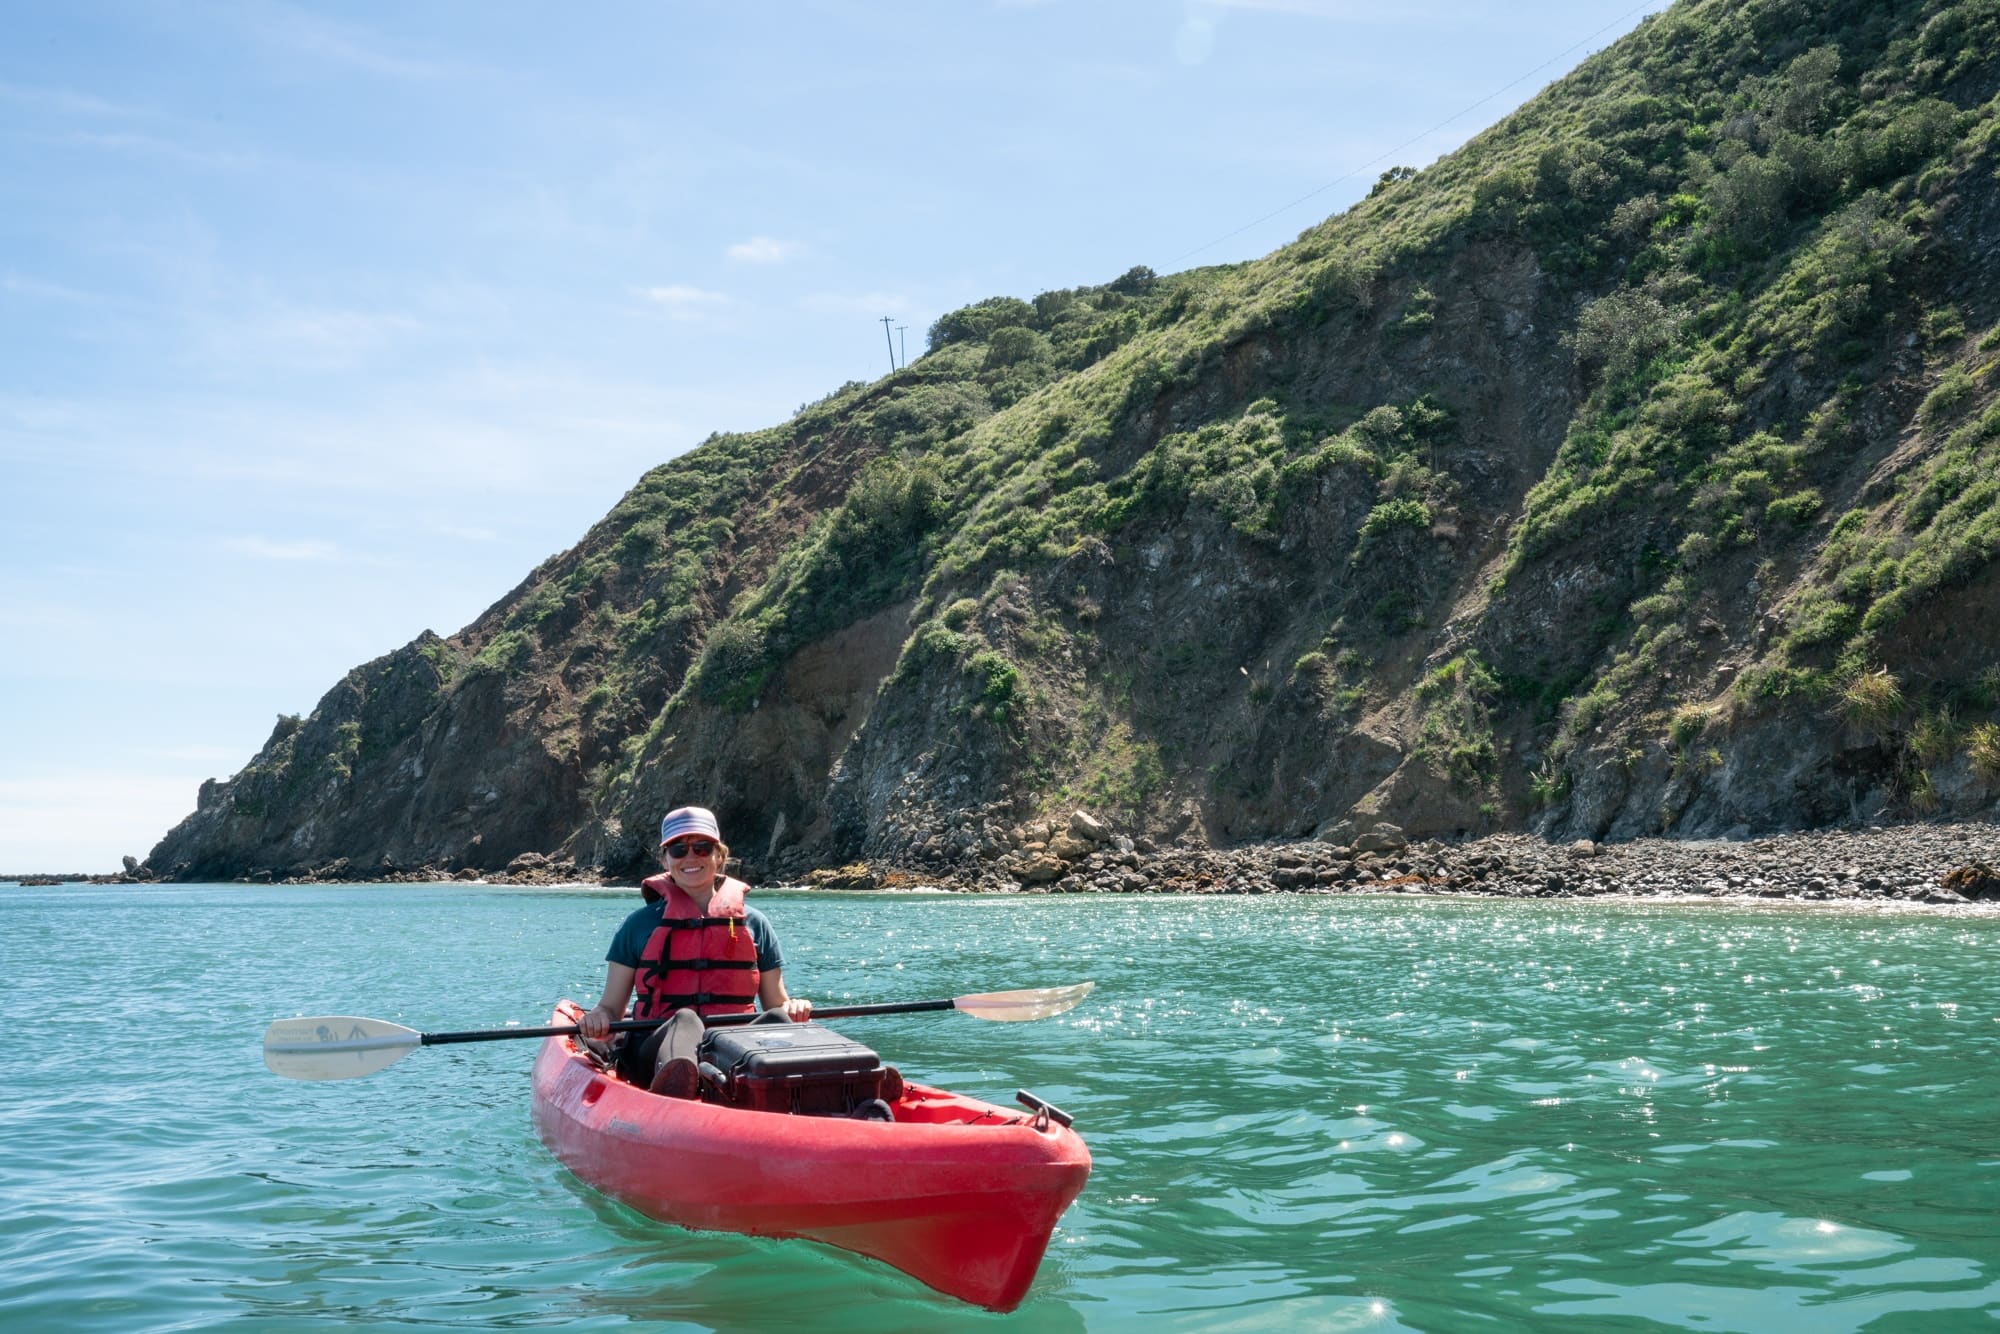 Woman sitting in kayak on the water with steep, rugged cliffs on one side